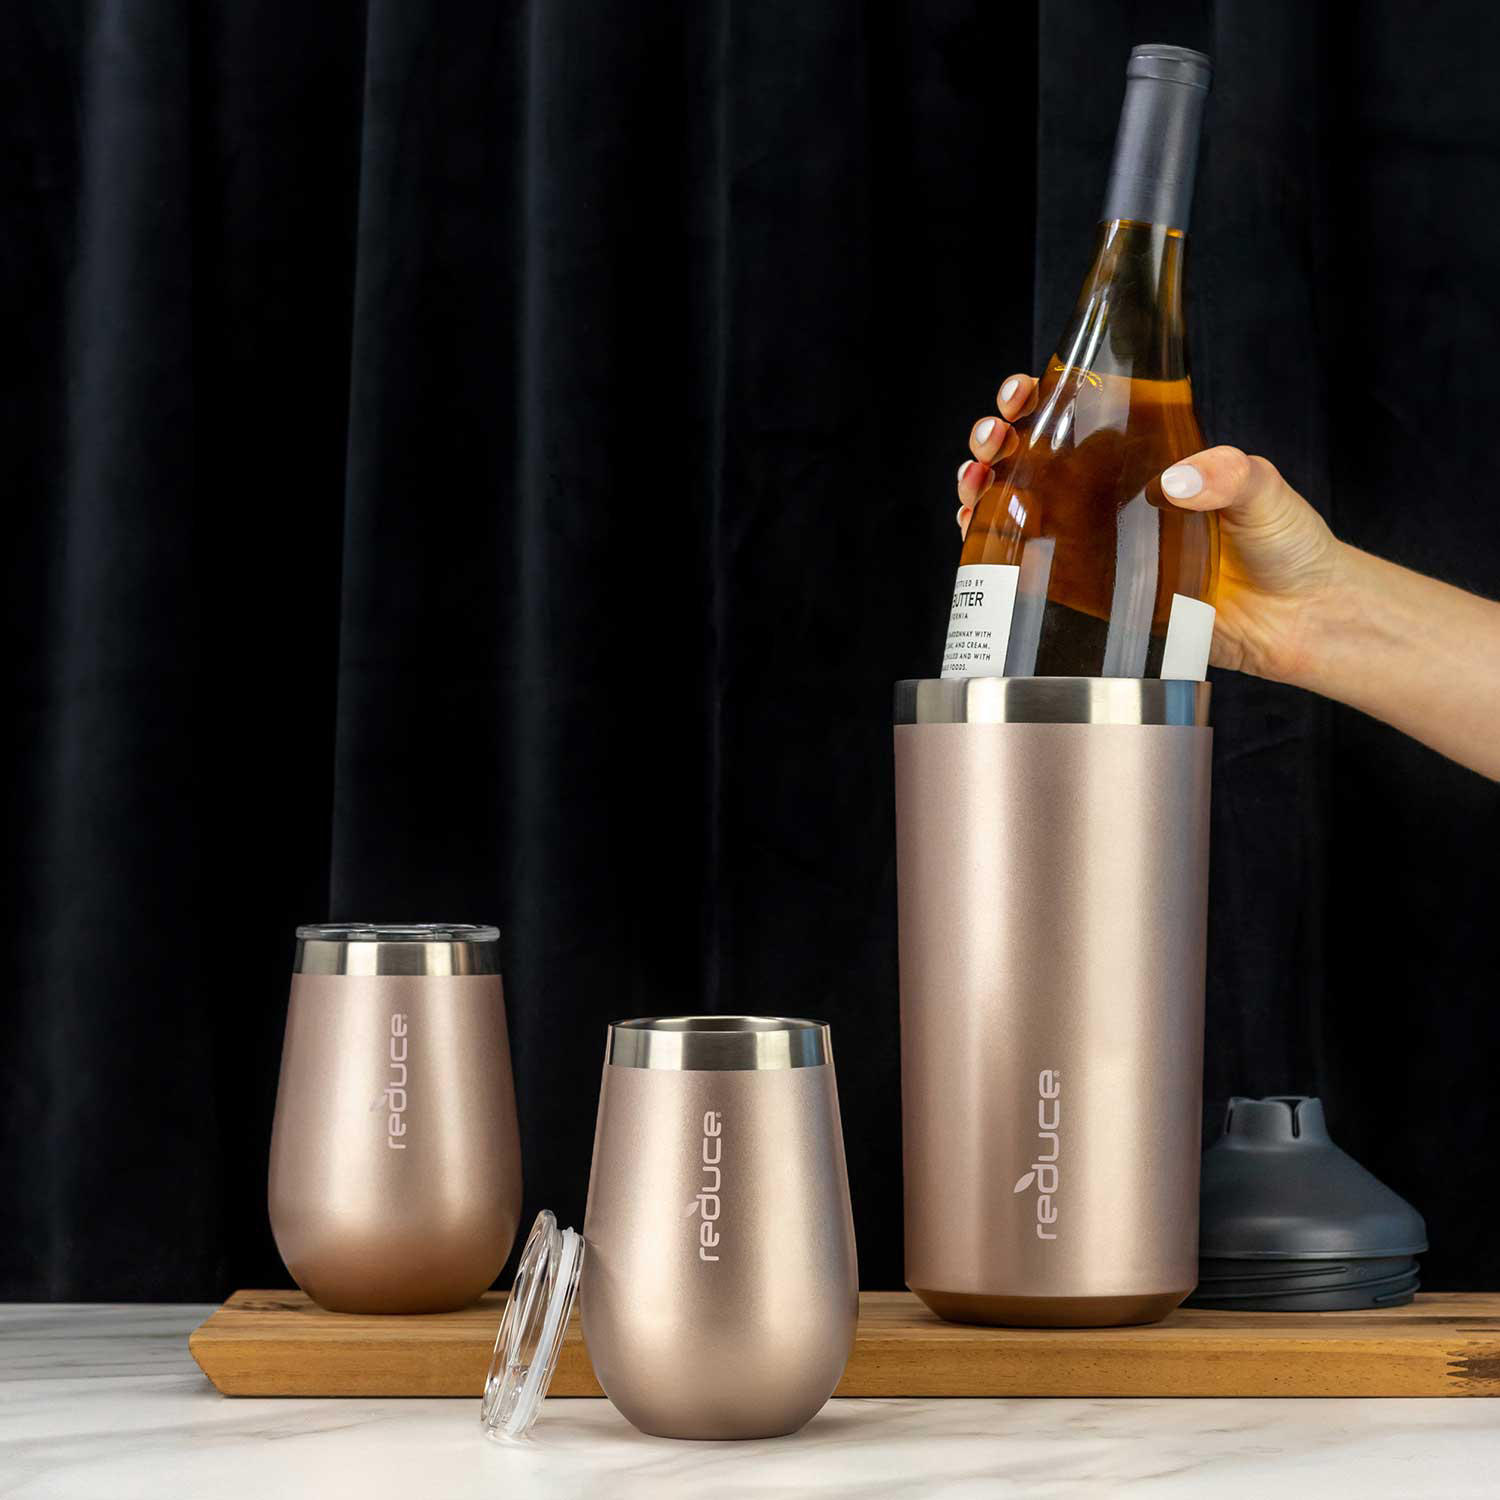 https://bigbigmart.com/wp-content/uploads/2022/07/Reduce-Wine-Cooler-Set-Cotton-%E2%80%93-Stainless-Steel-Wine-Bottle-Cooler-Set-with-12oz-Insulated-Wine-Tumblers-%E2%80%93-Keep-Wine-at-the-Perfect-Temperature-No-Ice-Required-Fits-Most-Wine-Bottles.jpg